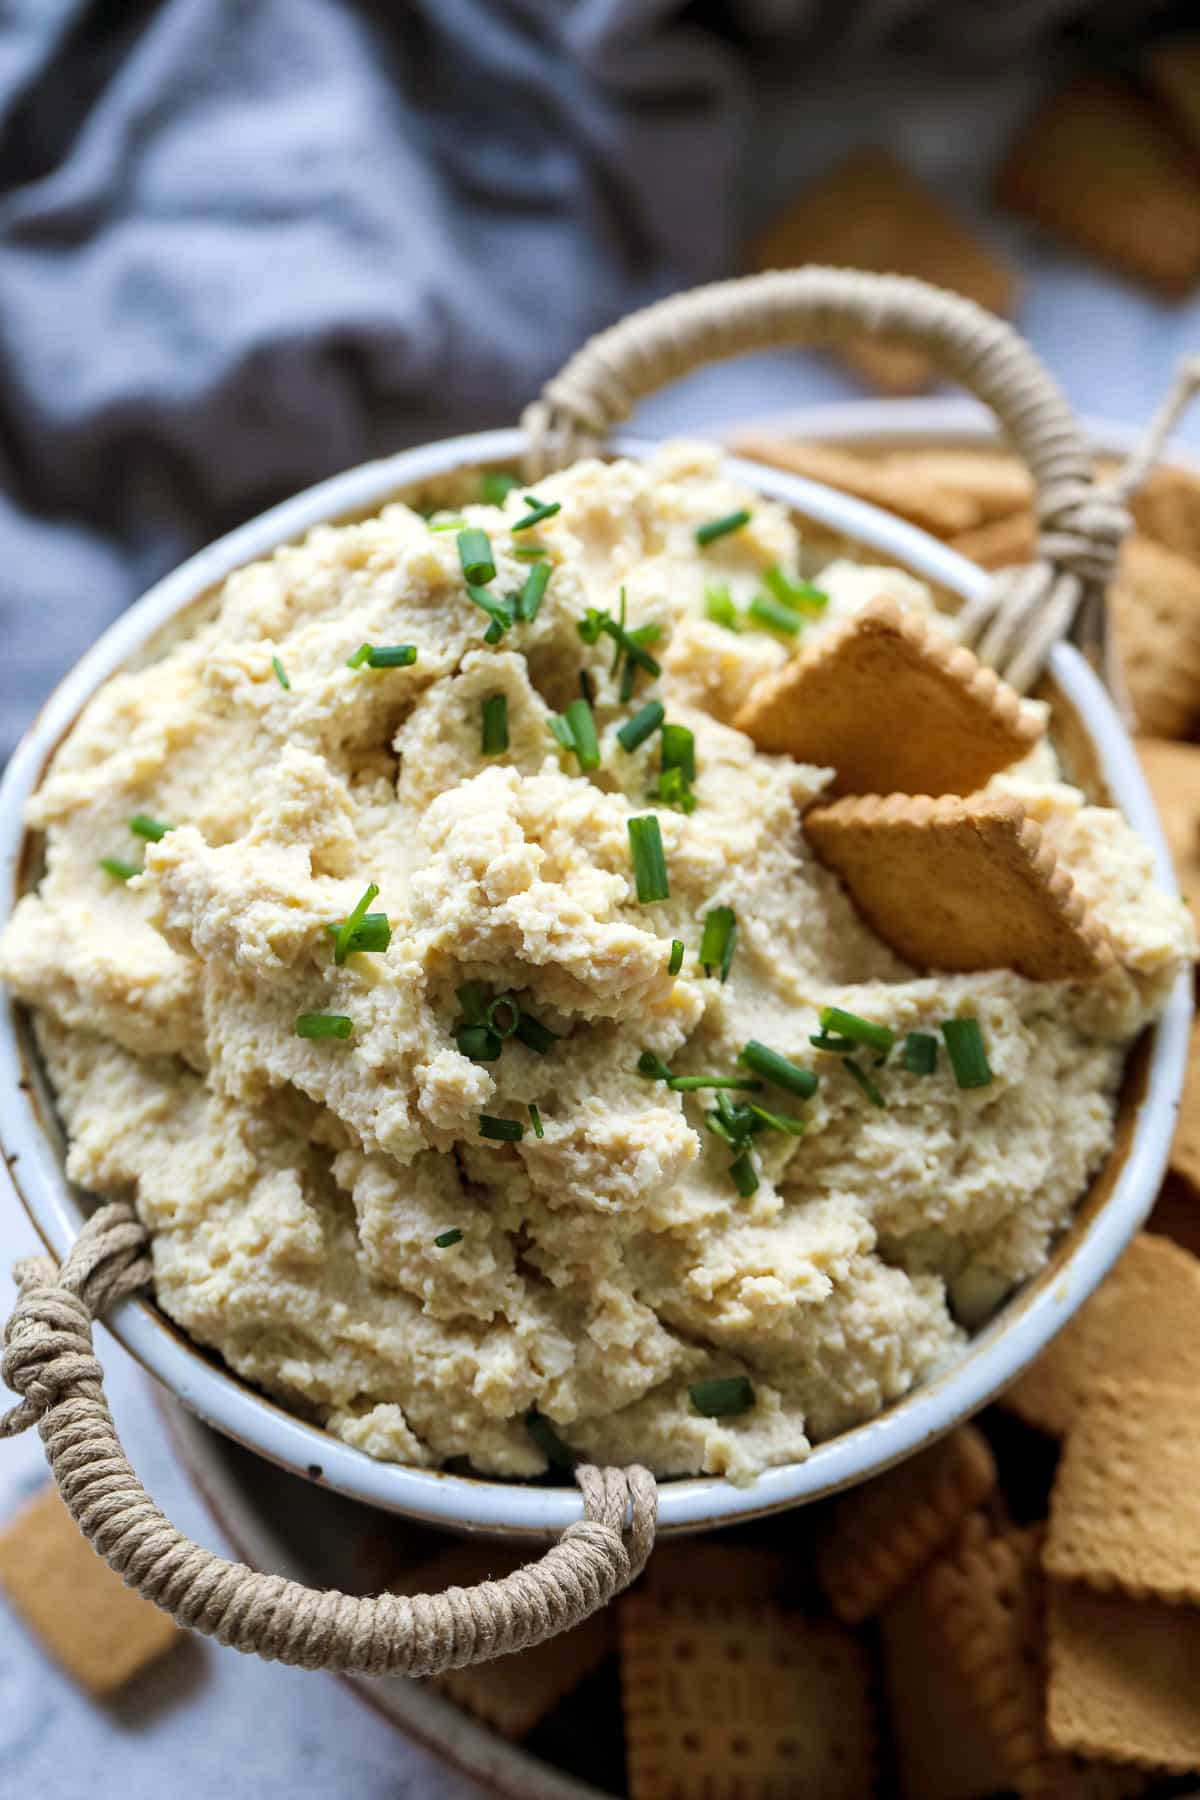 A bowl of dip with crackers and crackers.